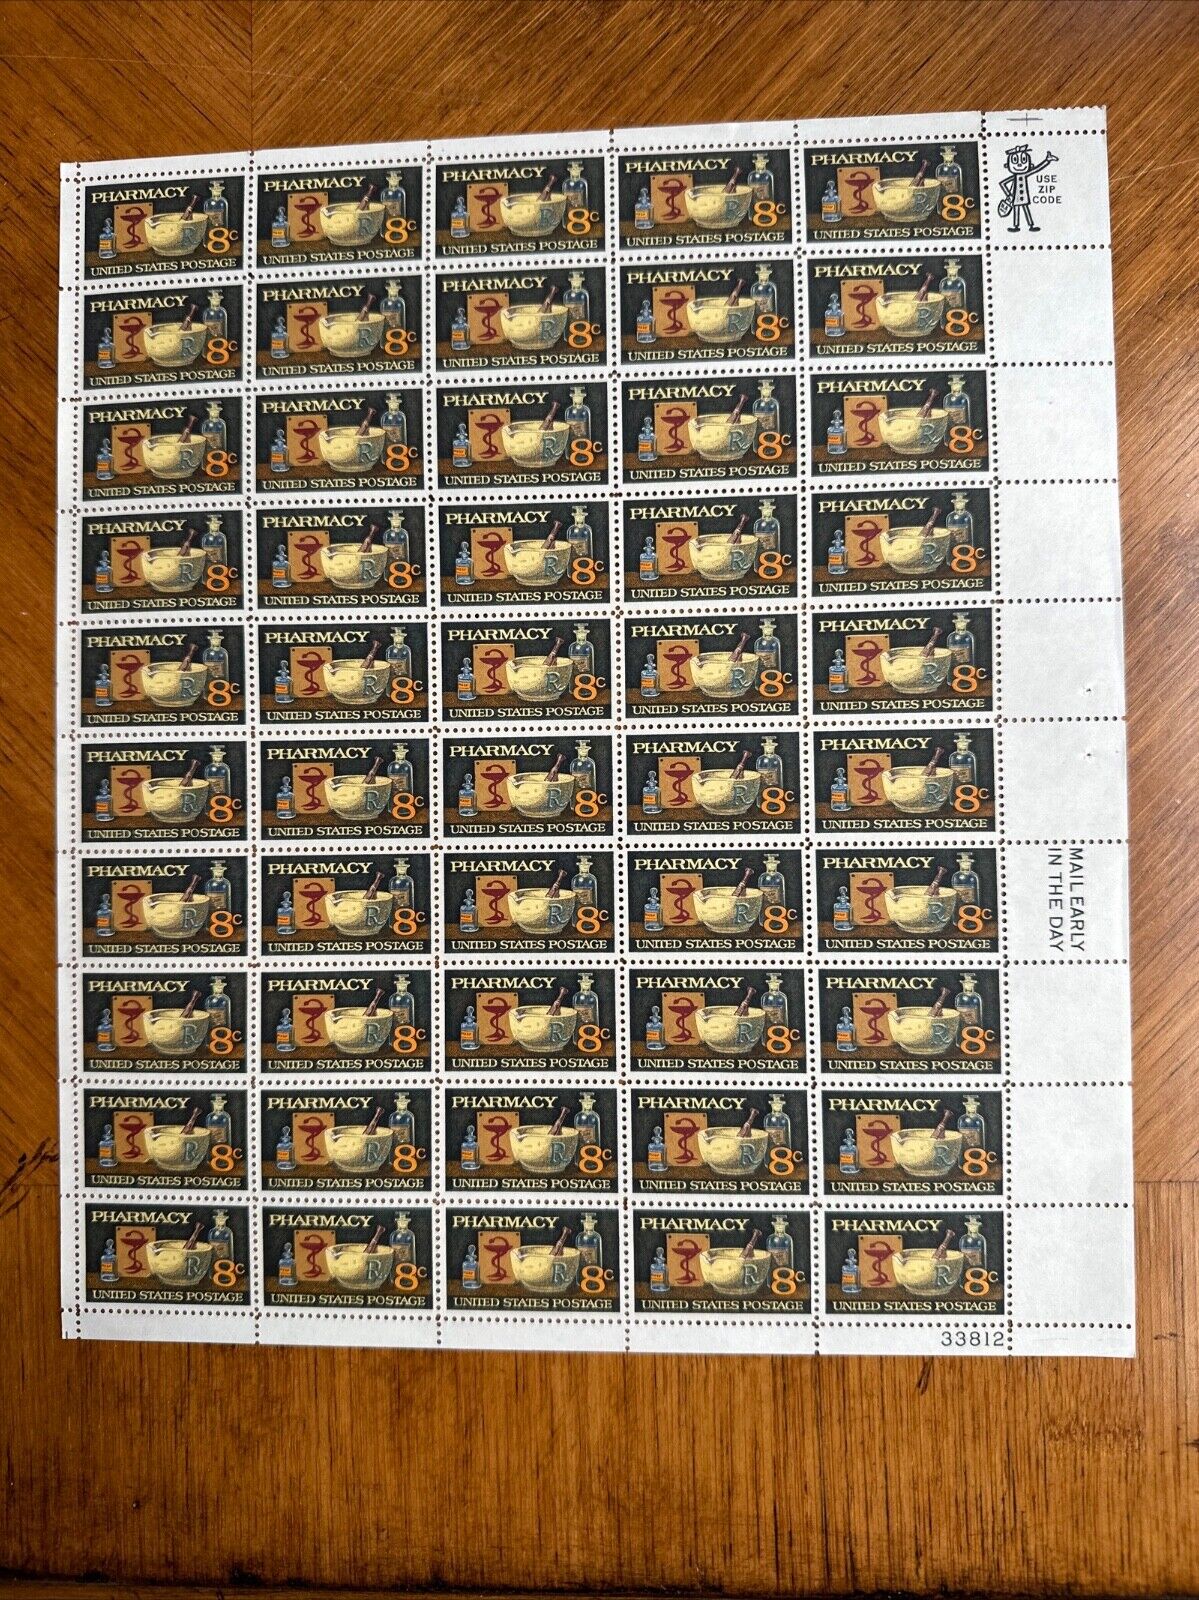 PHARMACY Stamp 1972 United States 8-cent STAMPS sheet See Photos